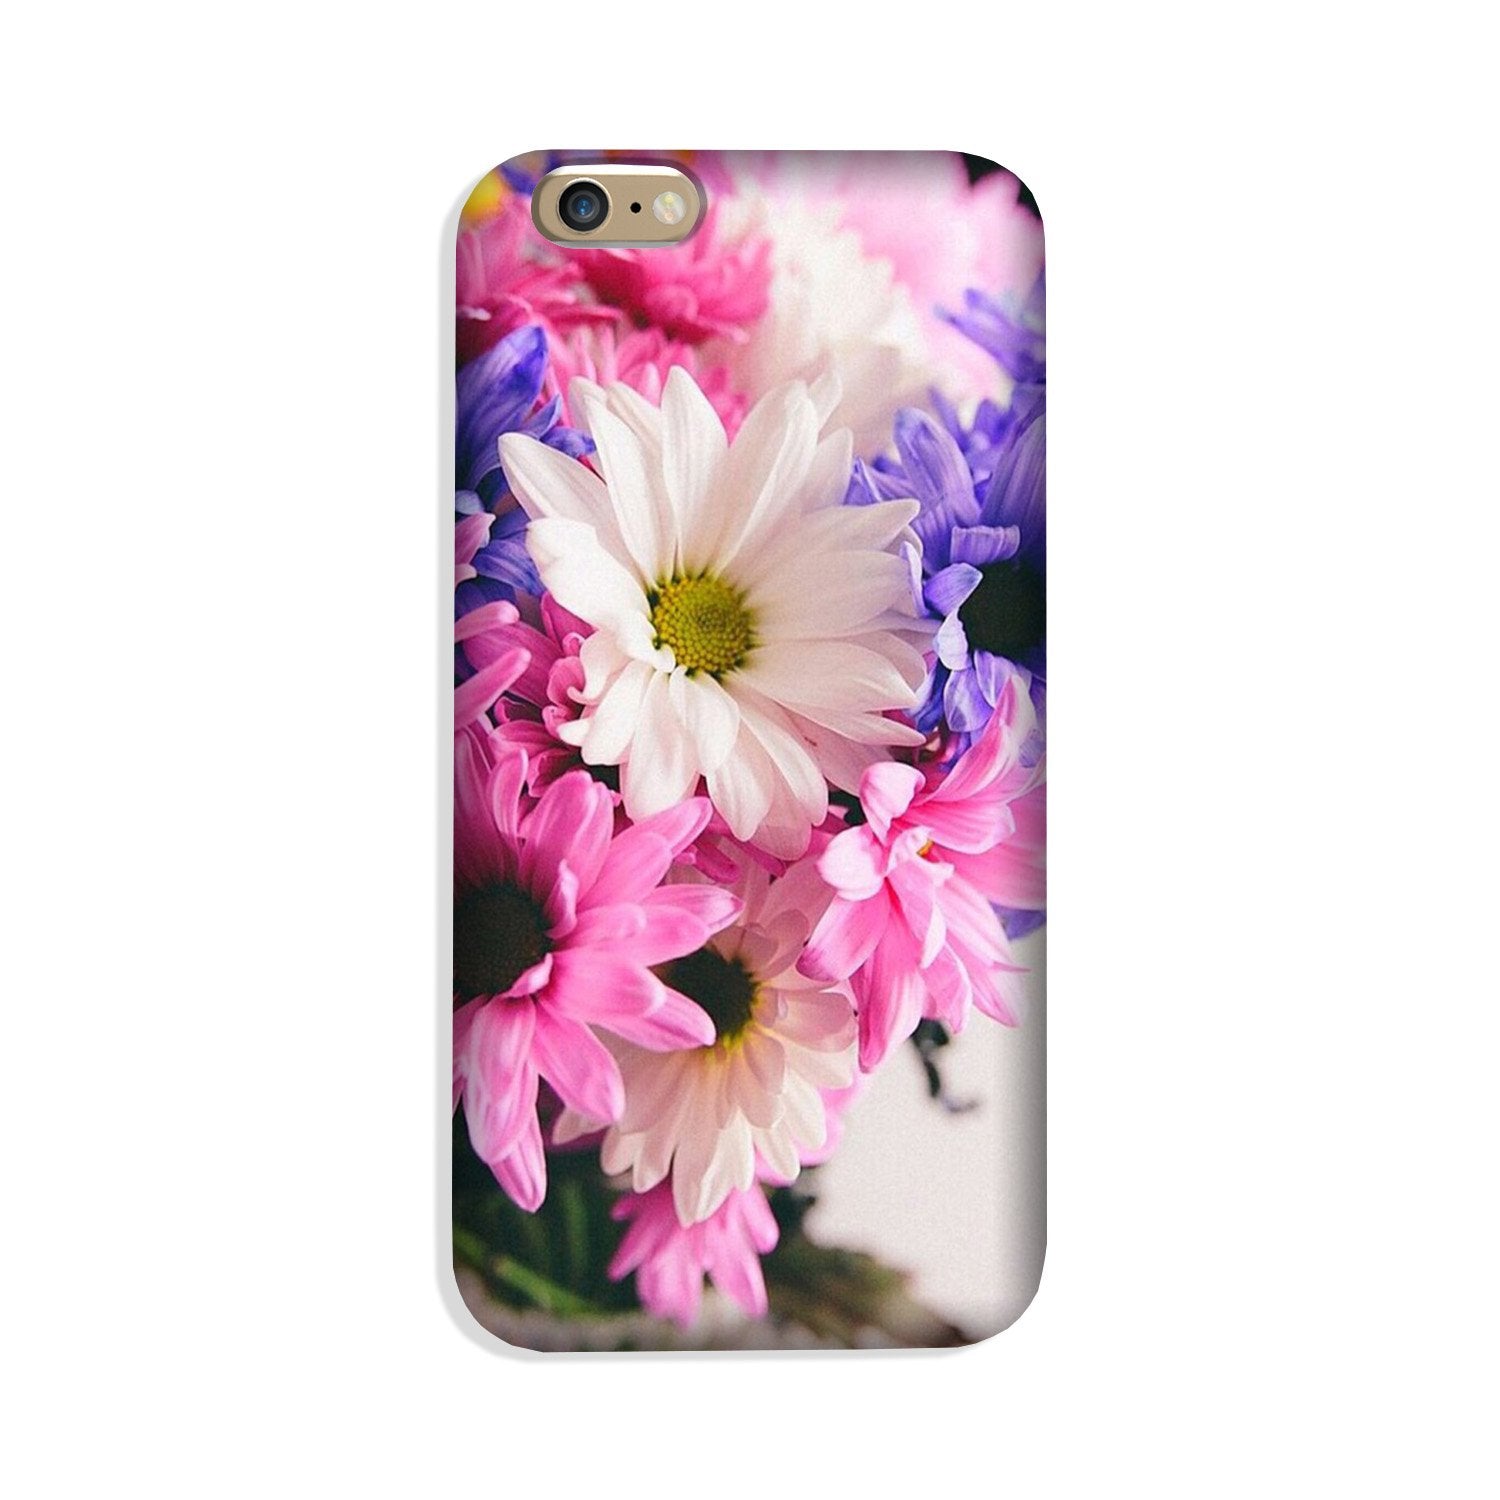 Coloful Daisy Case for iPhone 8